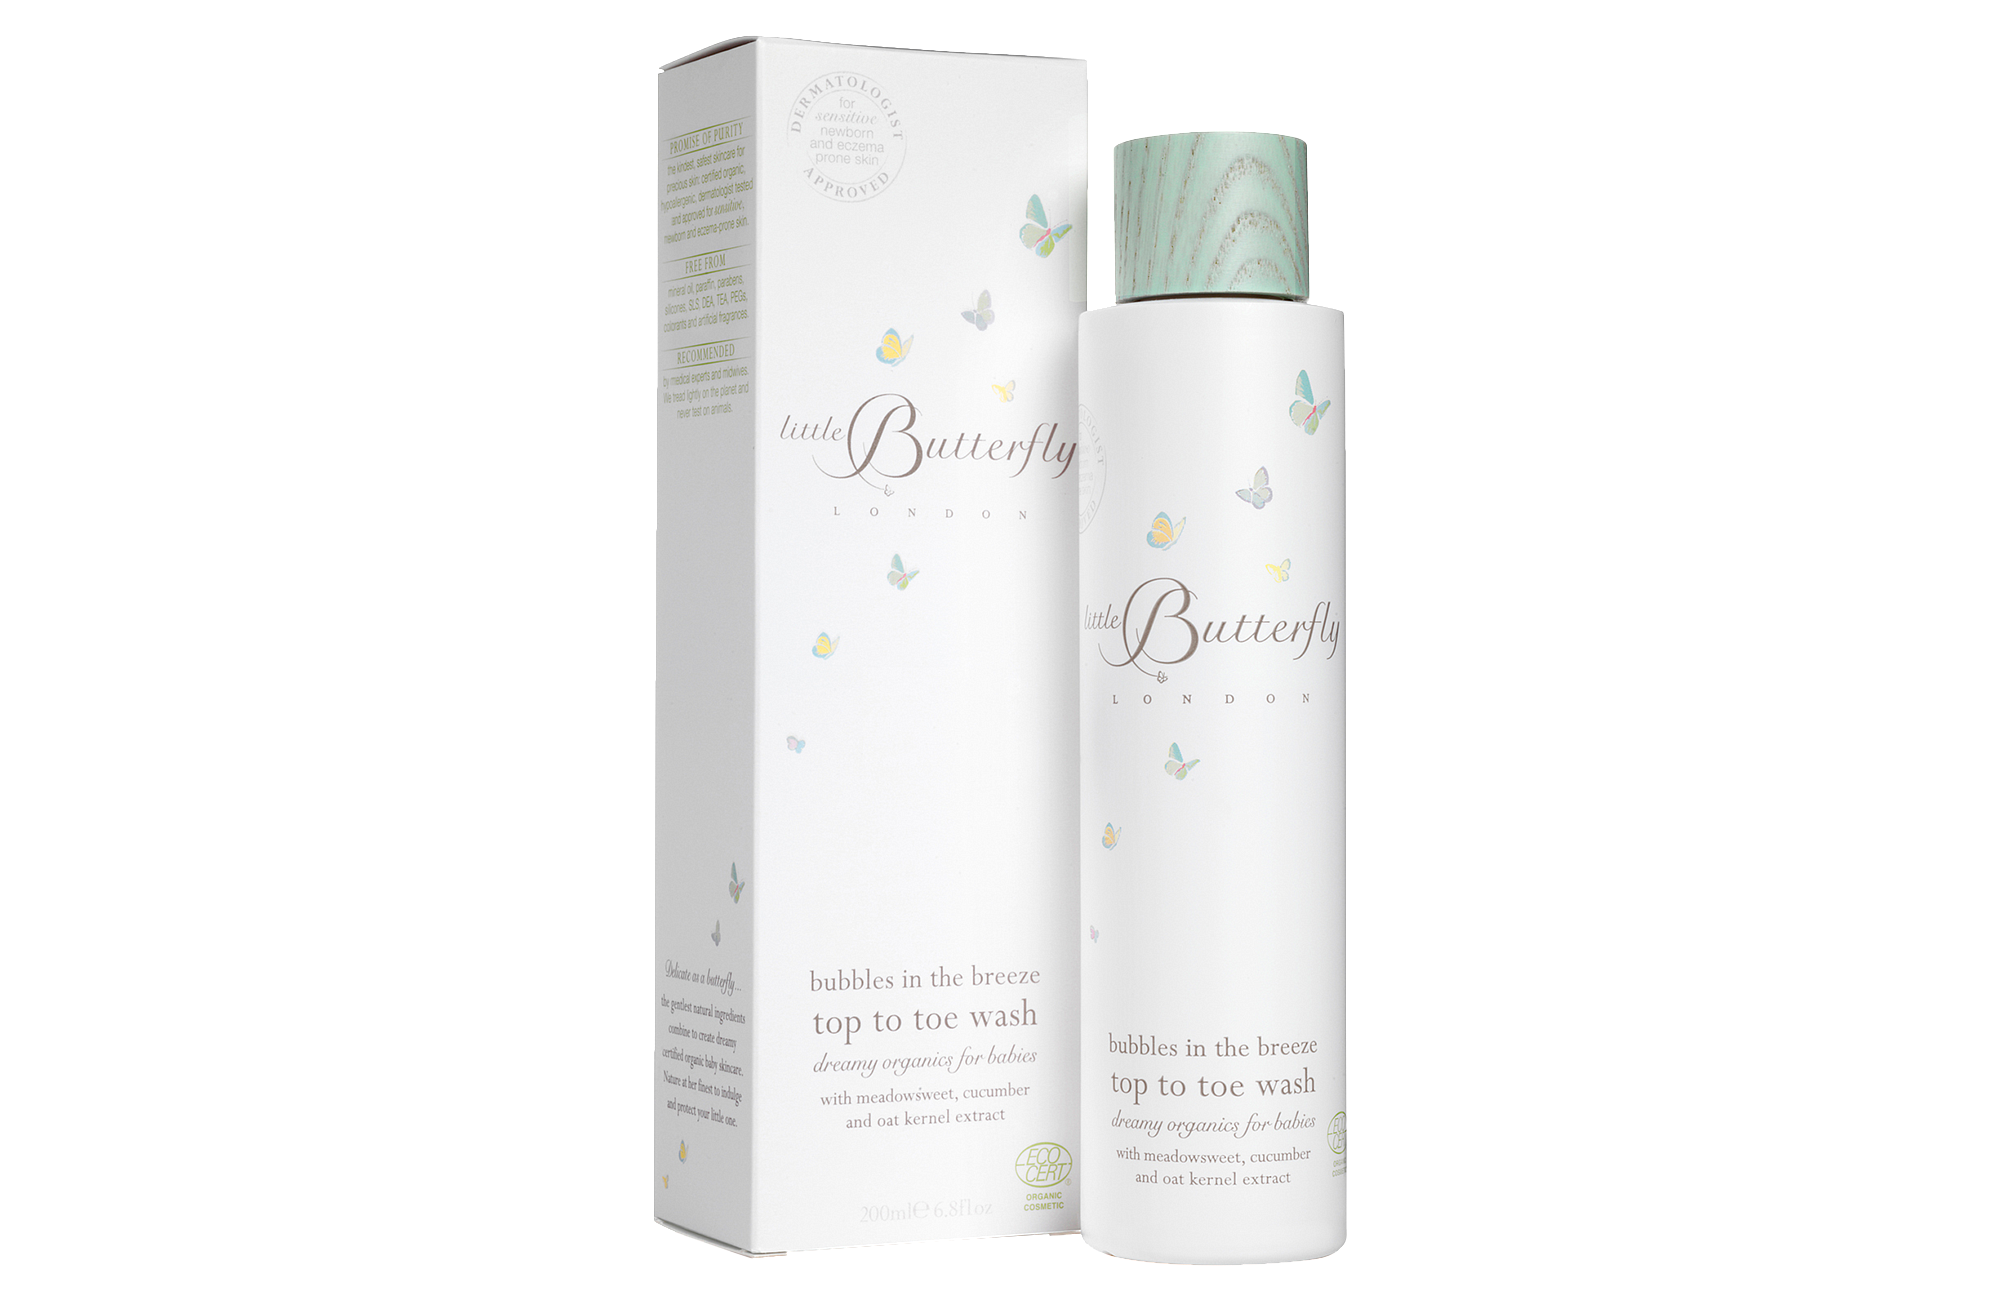 Top to toe wash «Bubbles in the breeze»